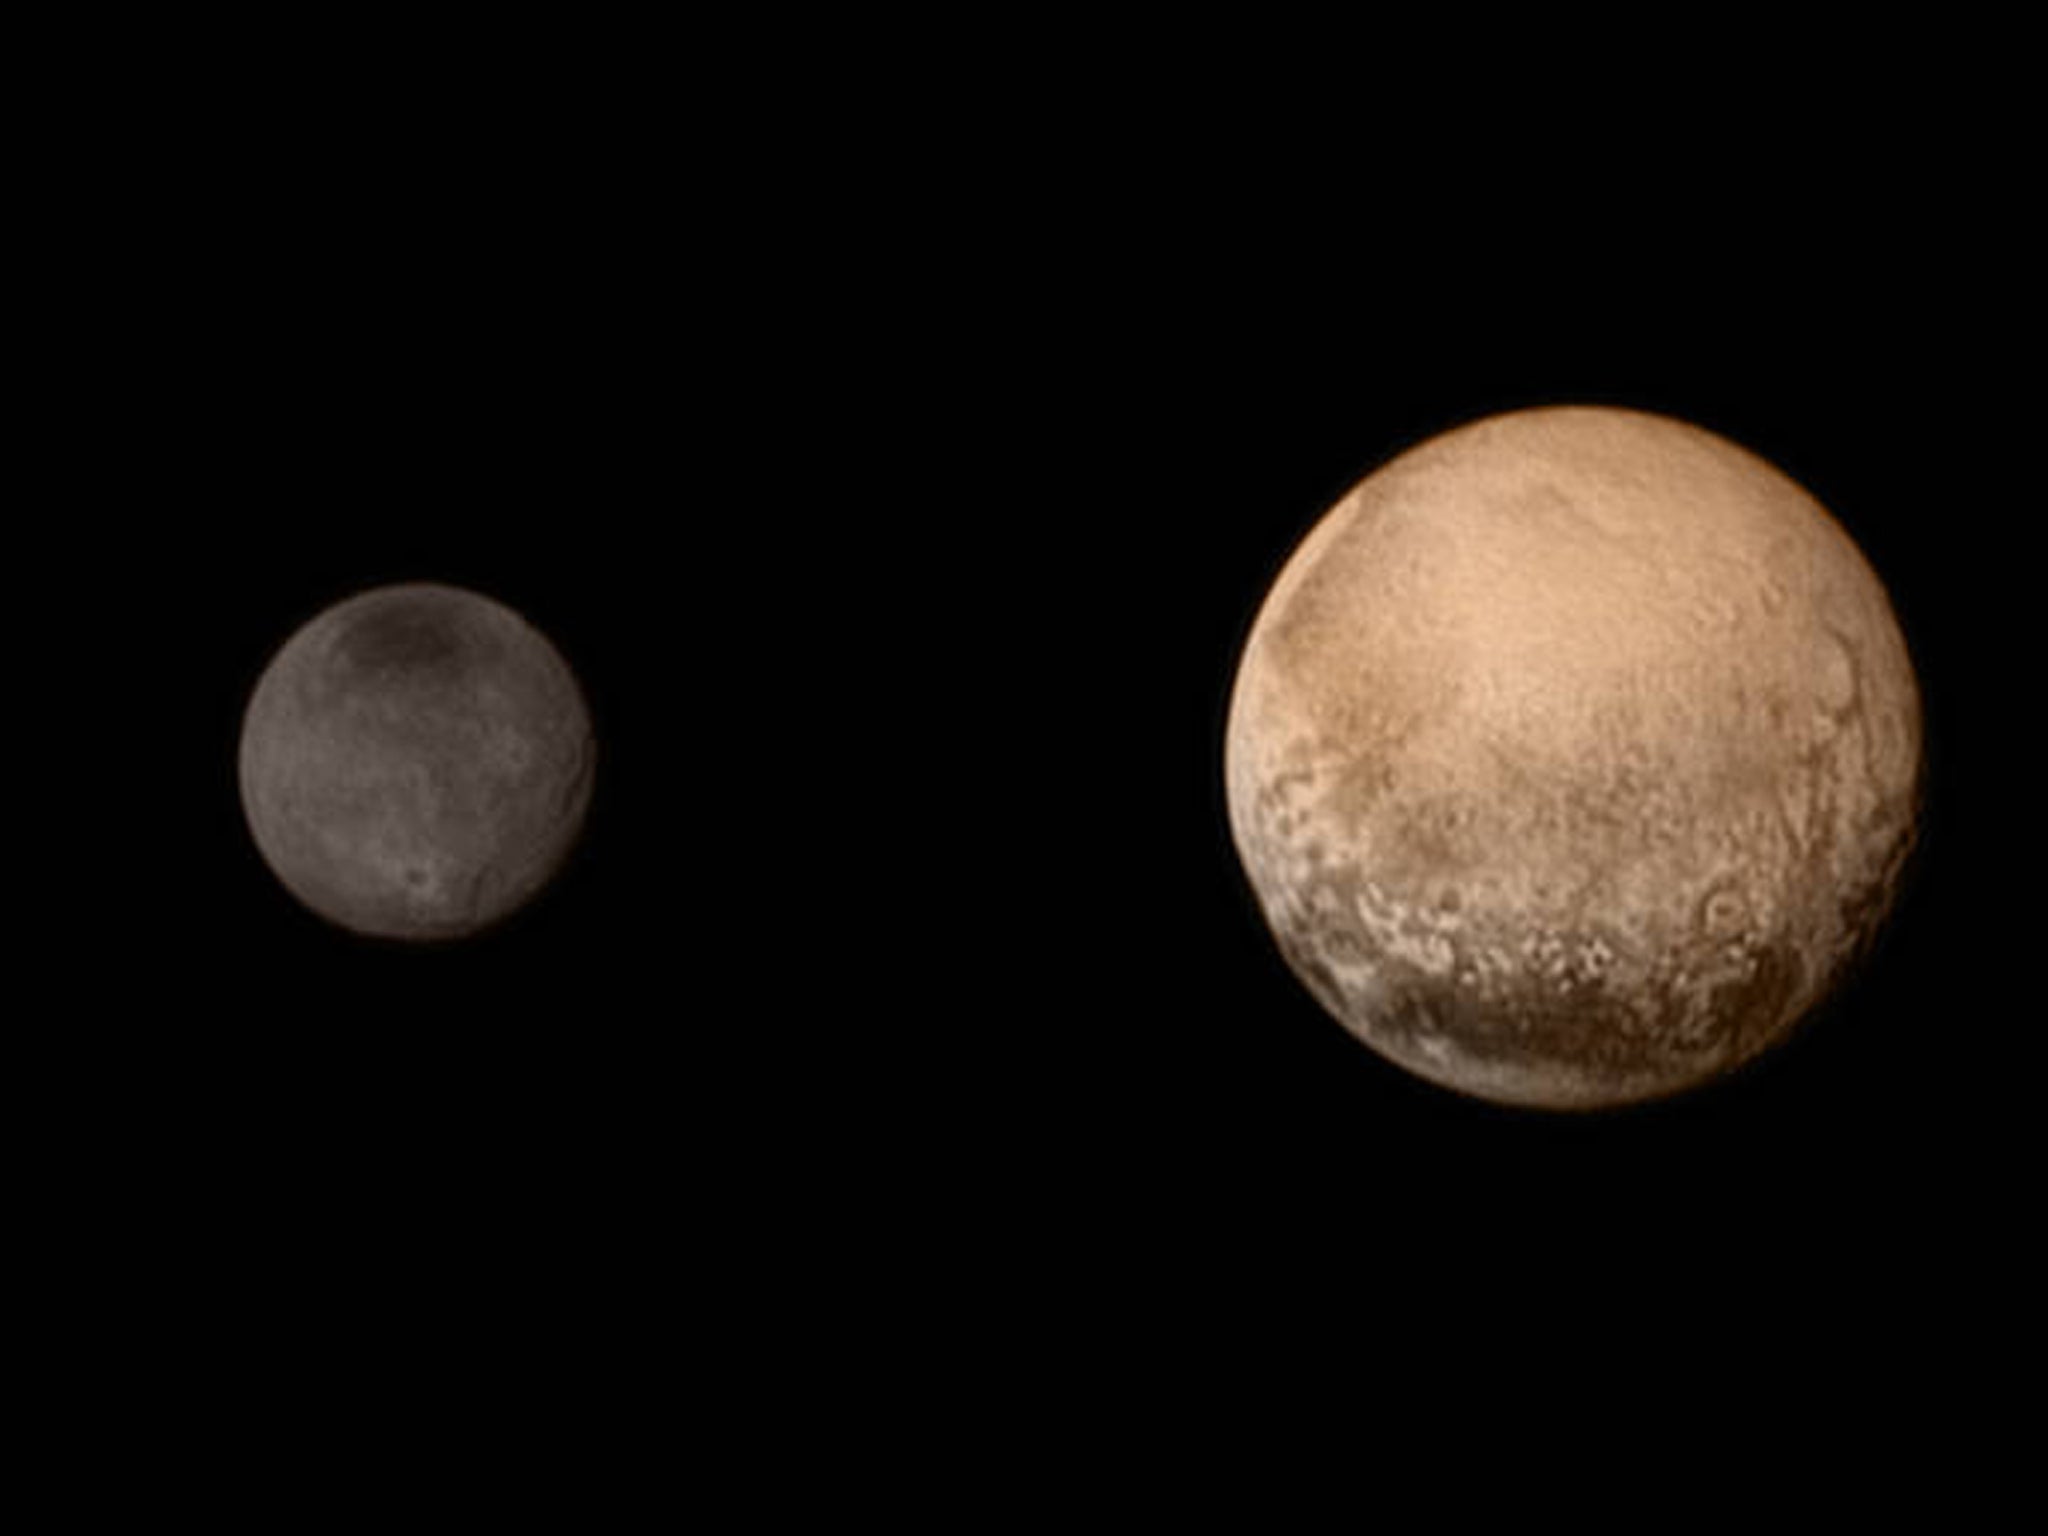 A portrait from the final approach - Pluto and Charon display striking color and brightness contrast